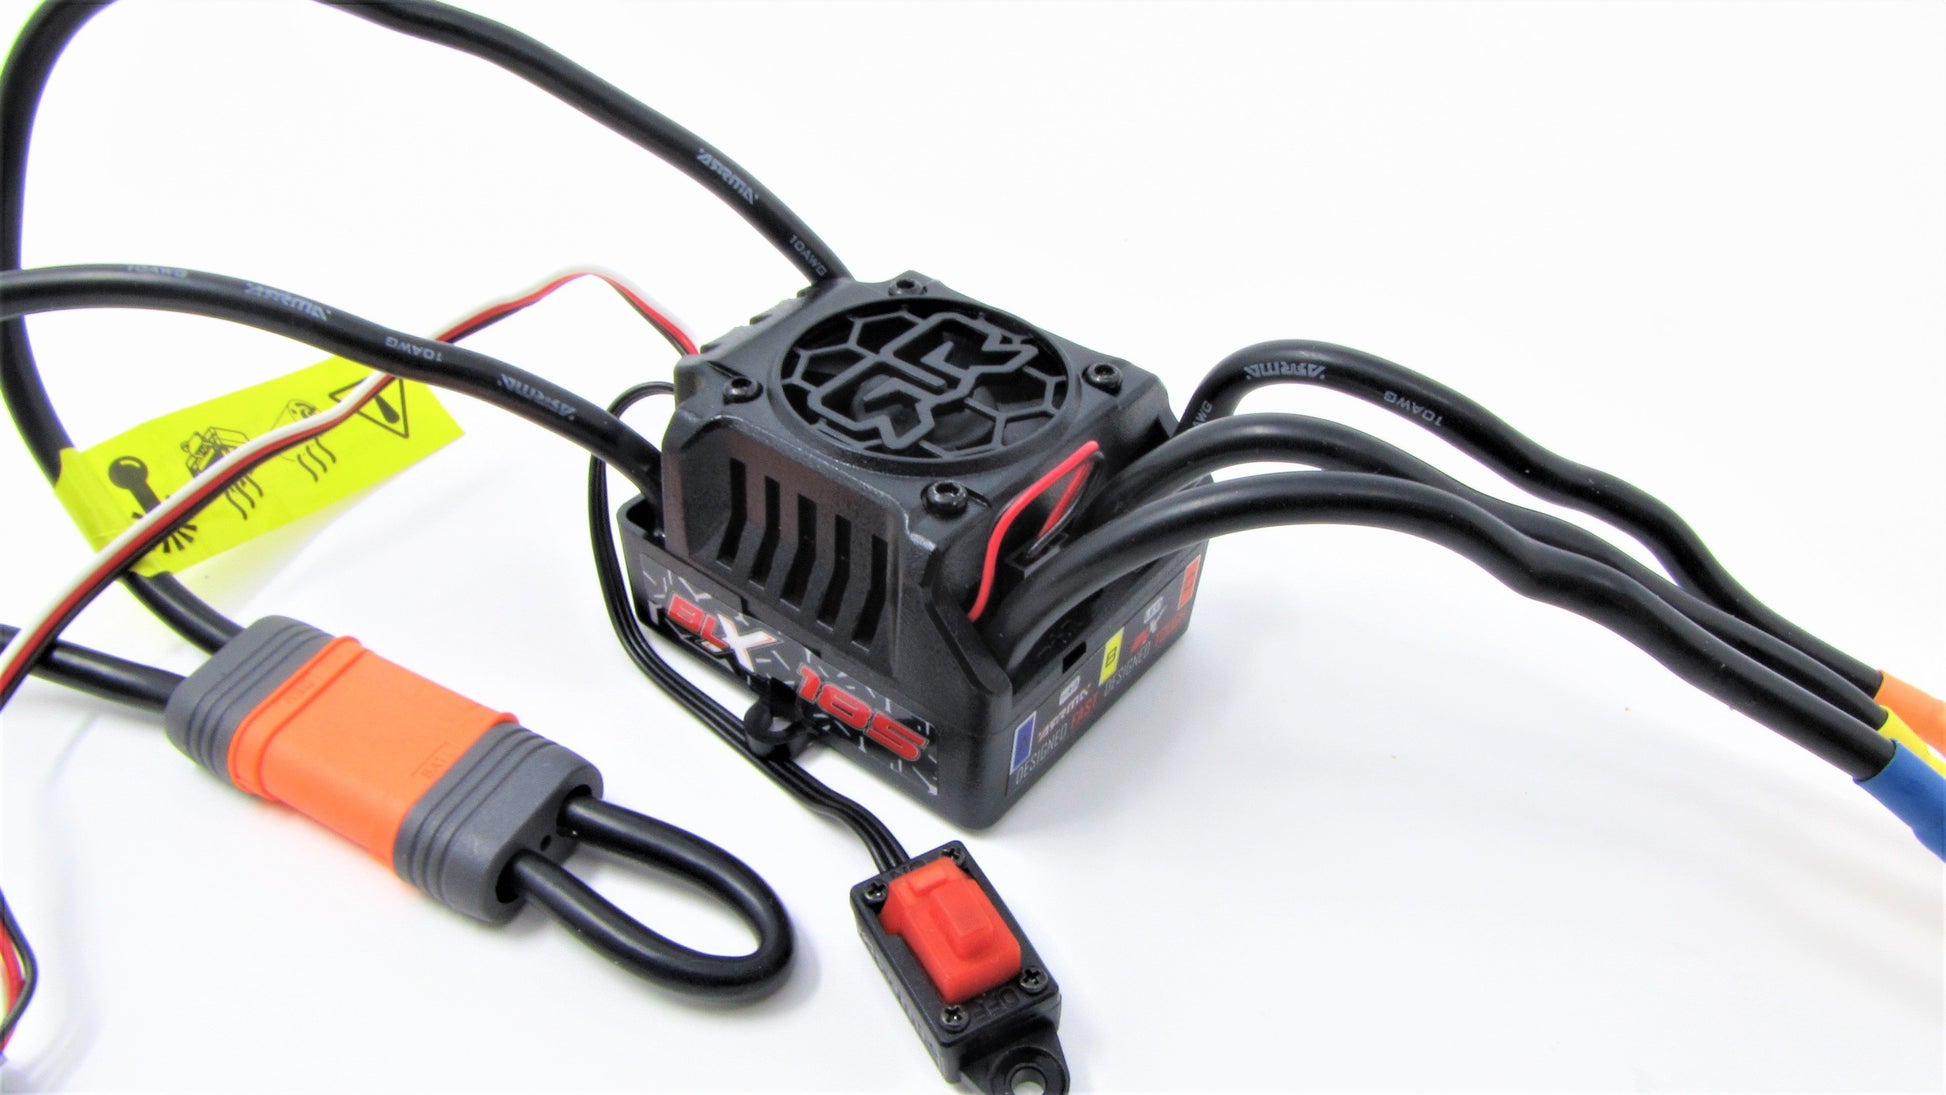 Arrma TALION 6s BLX - ESC (Brushless Speed Control talion senton Typhon AR106048 - Dirt Cheap RC SAVING YOU MONEY, ONE PART AT A TIME